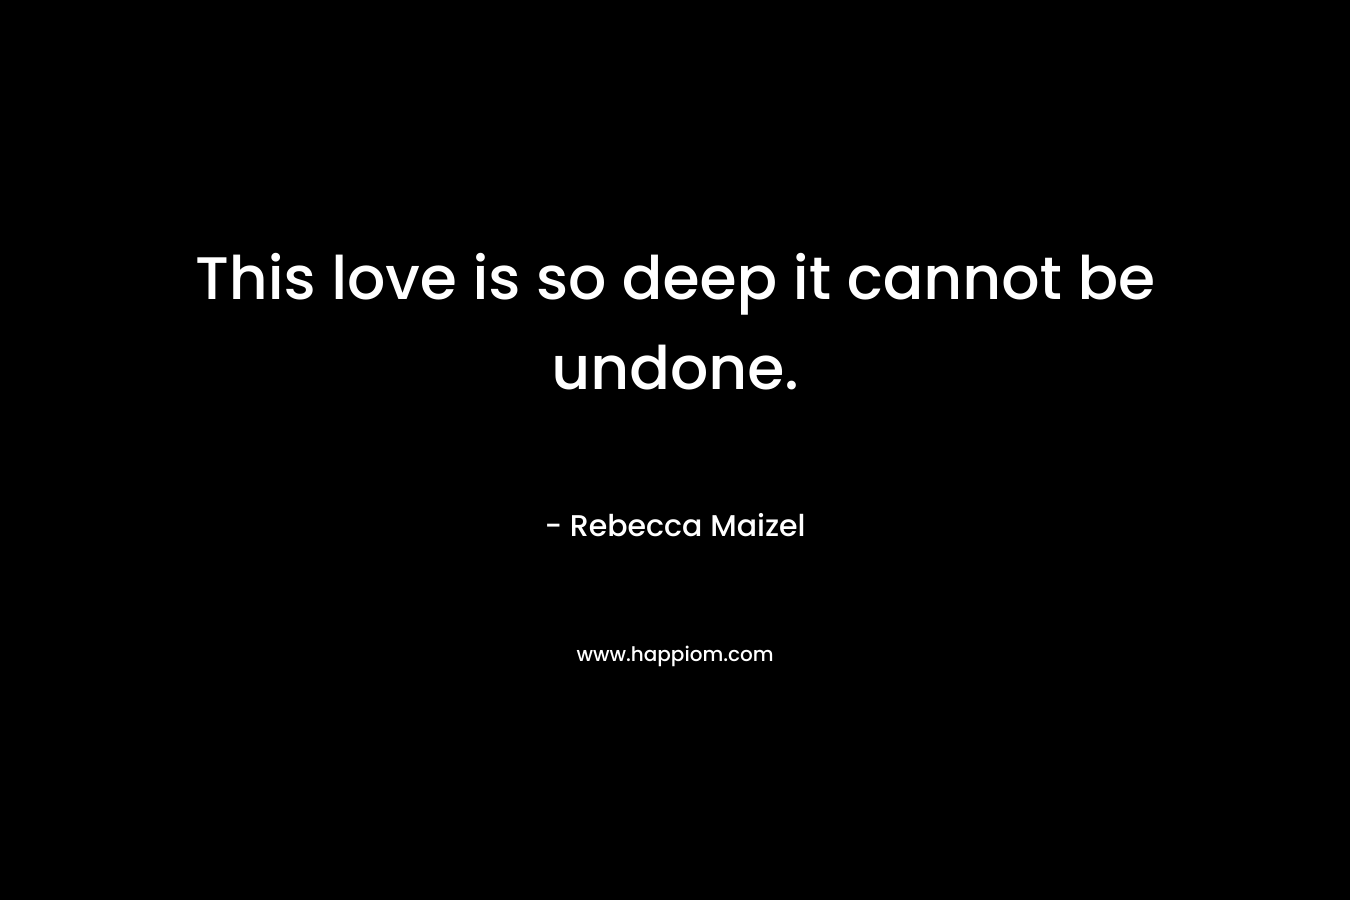 This love is so deep it cannot be undone.